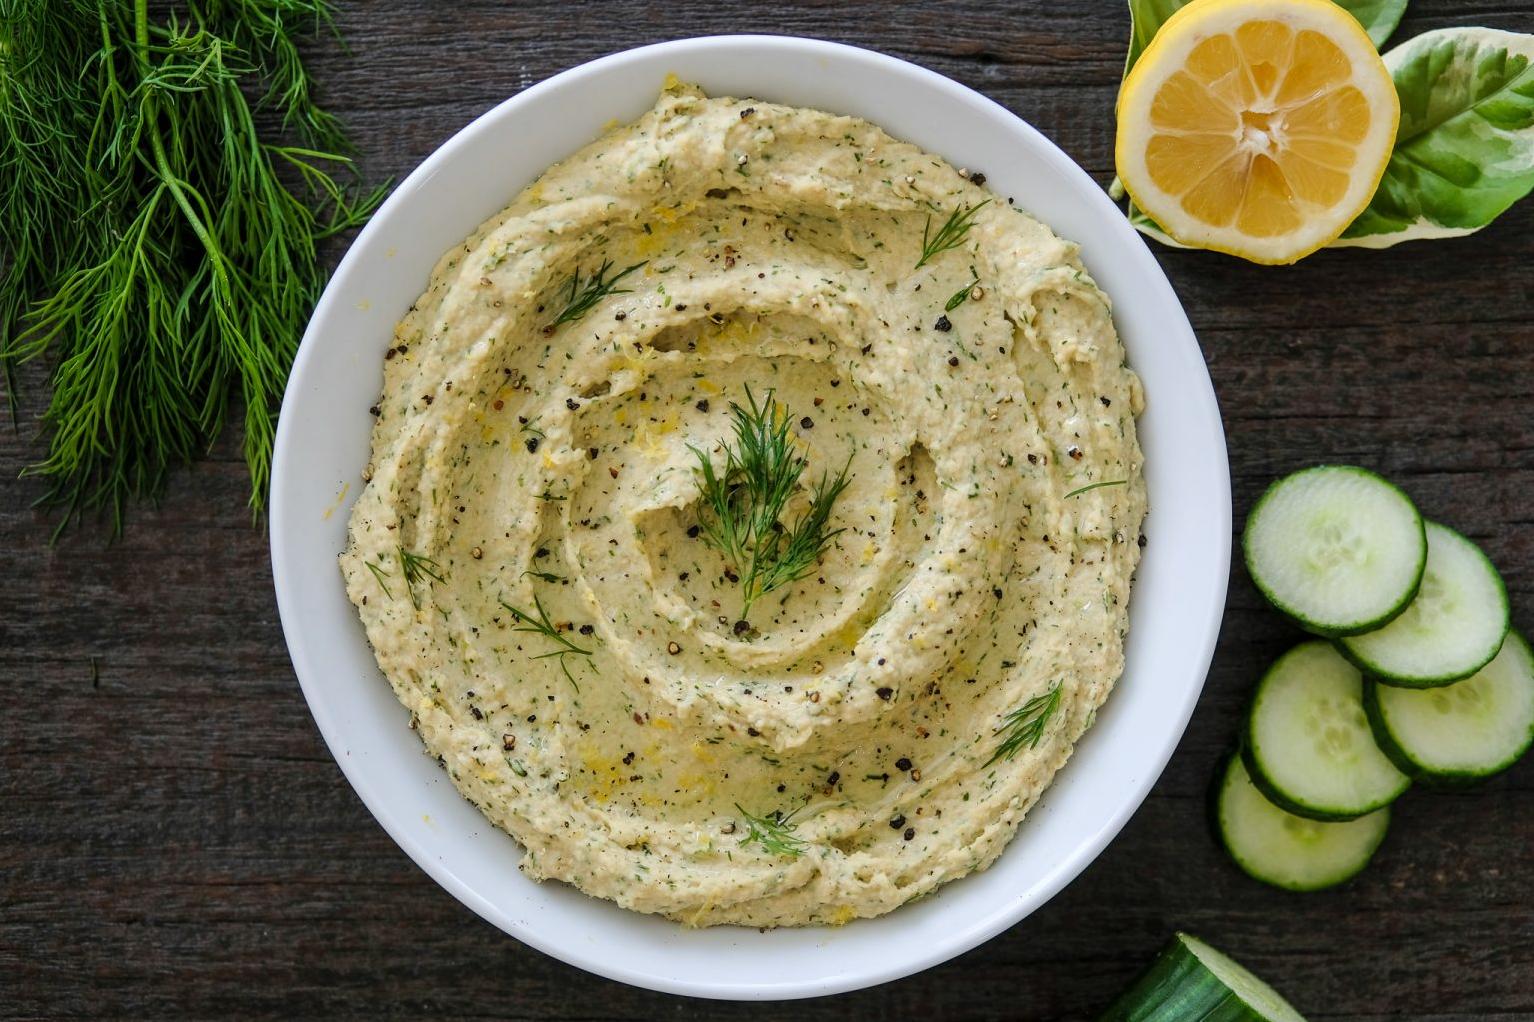  Brighten up your snack game with this Lemon-Dill Hummus!